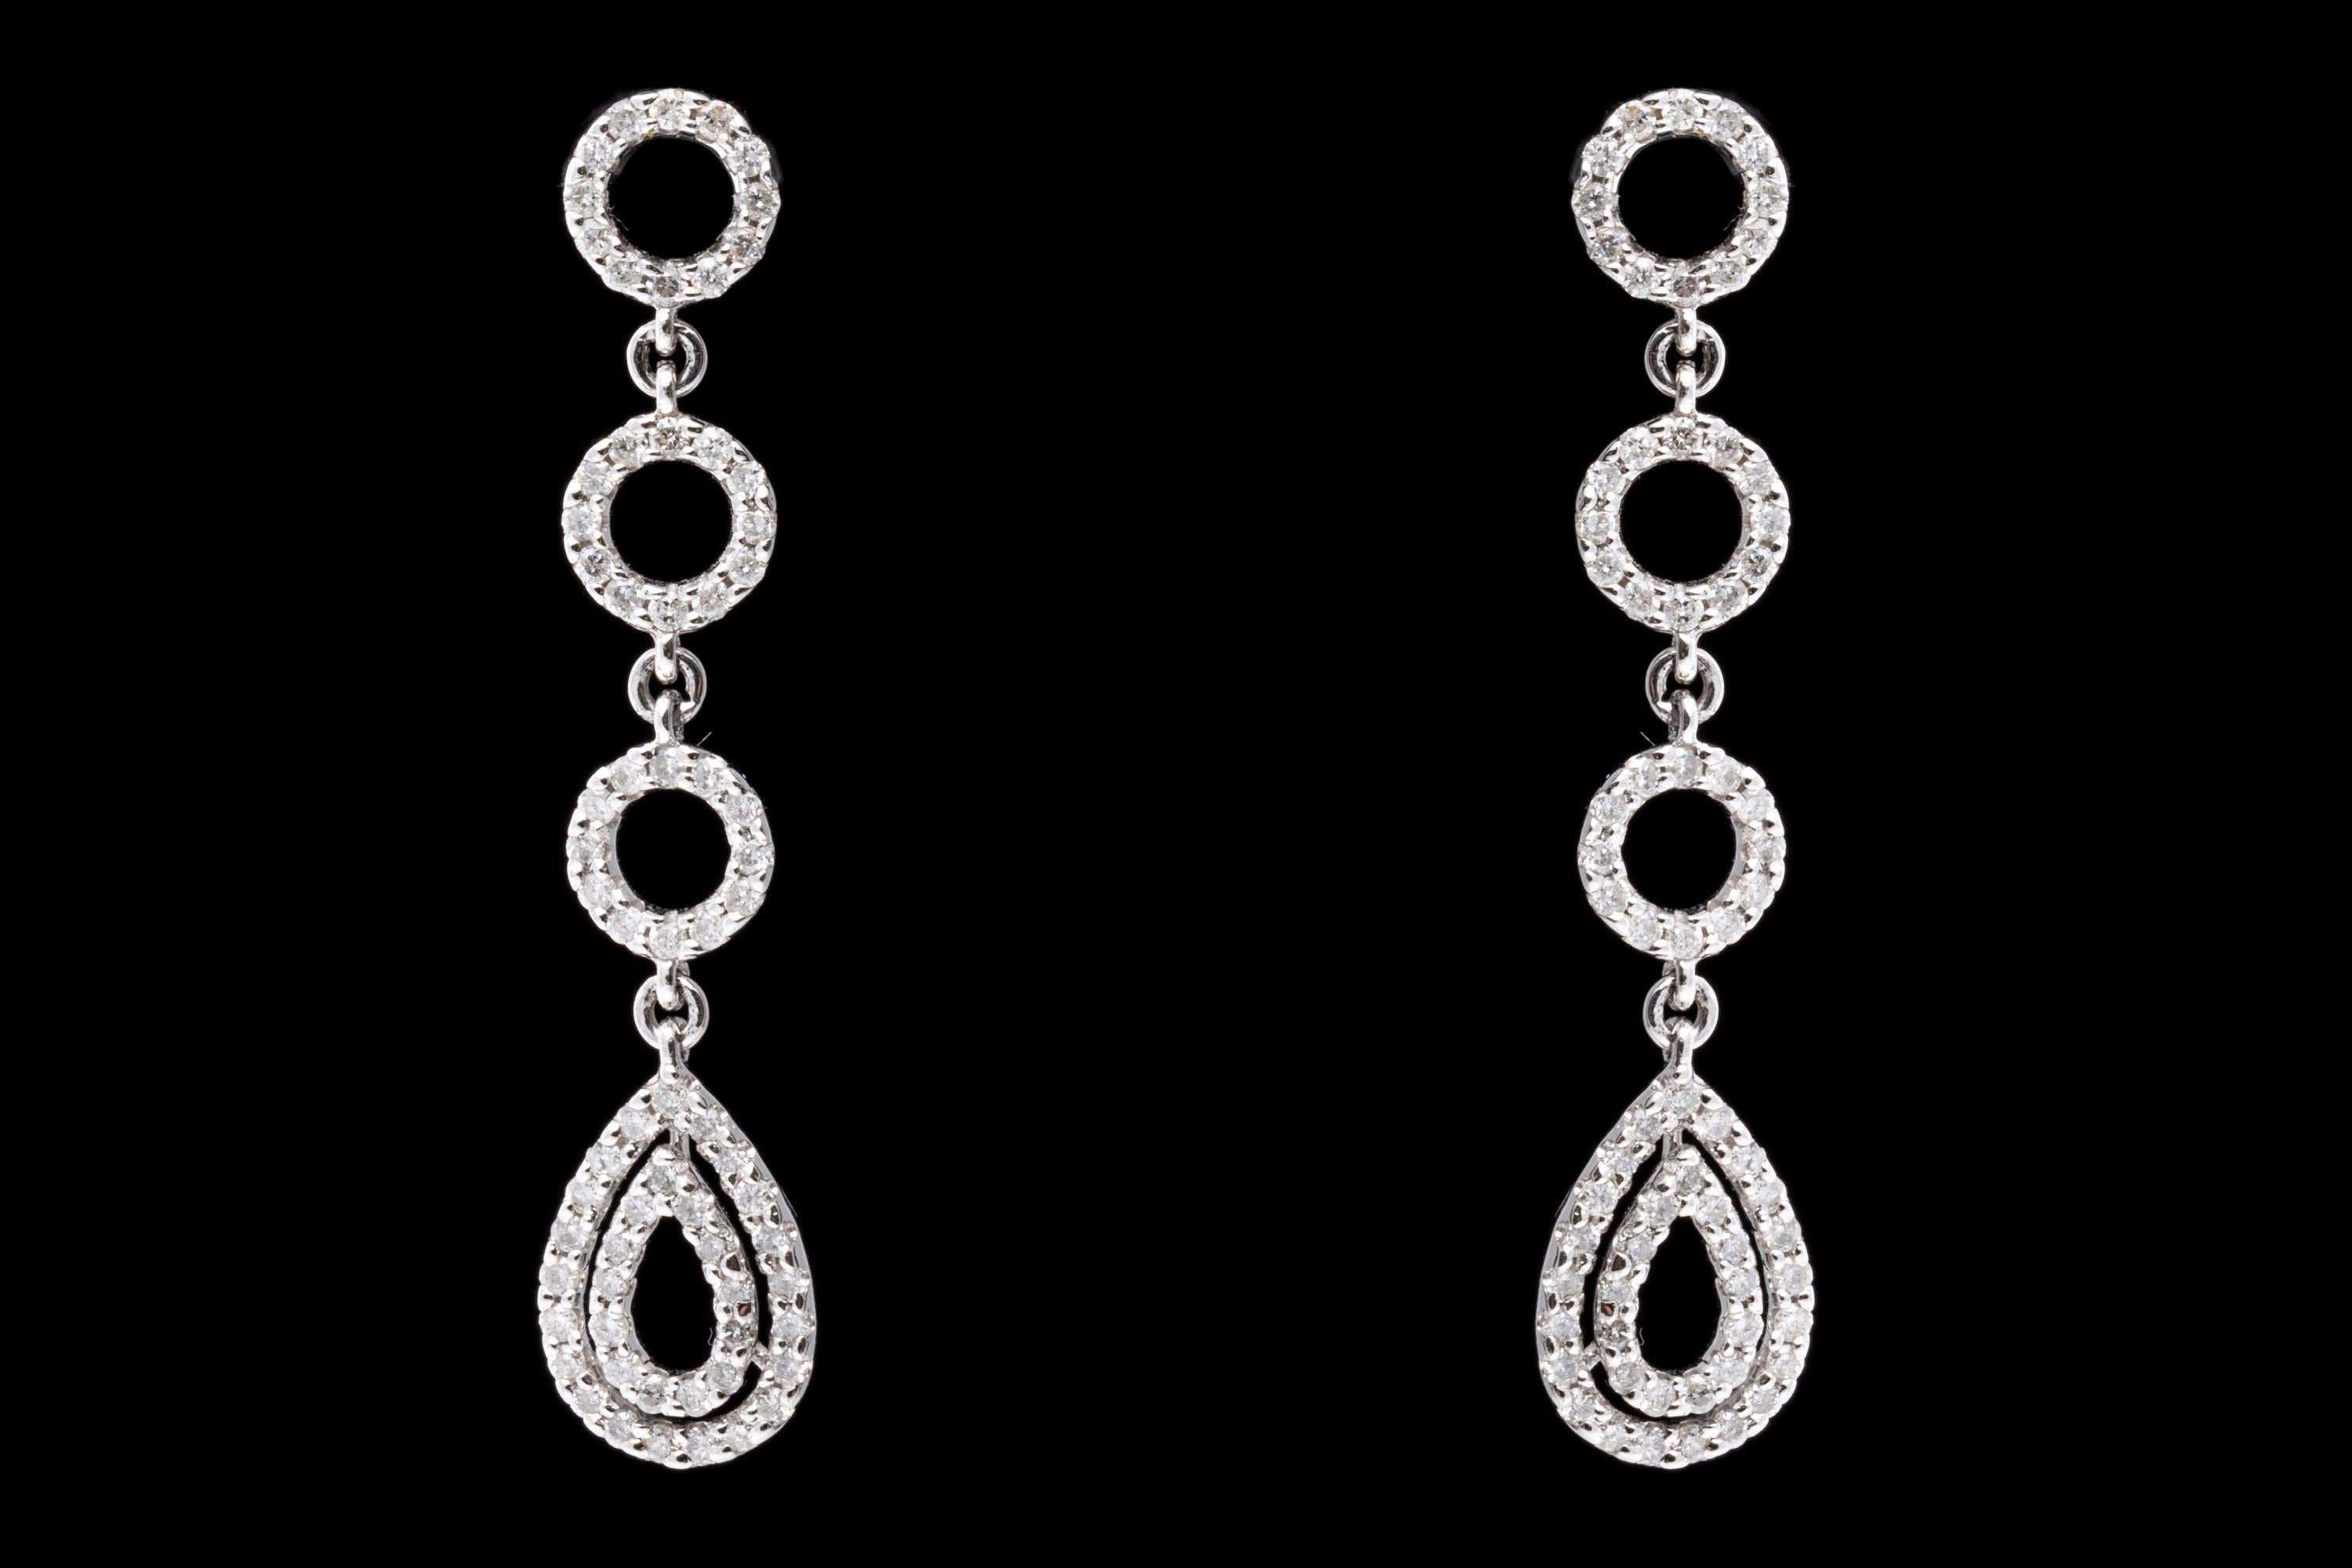 Glittering 14k White Gold and Diamond Drop Earrings For Sale 4